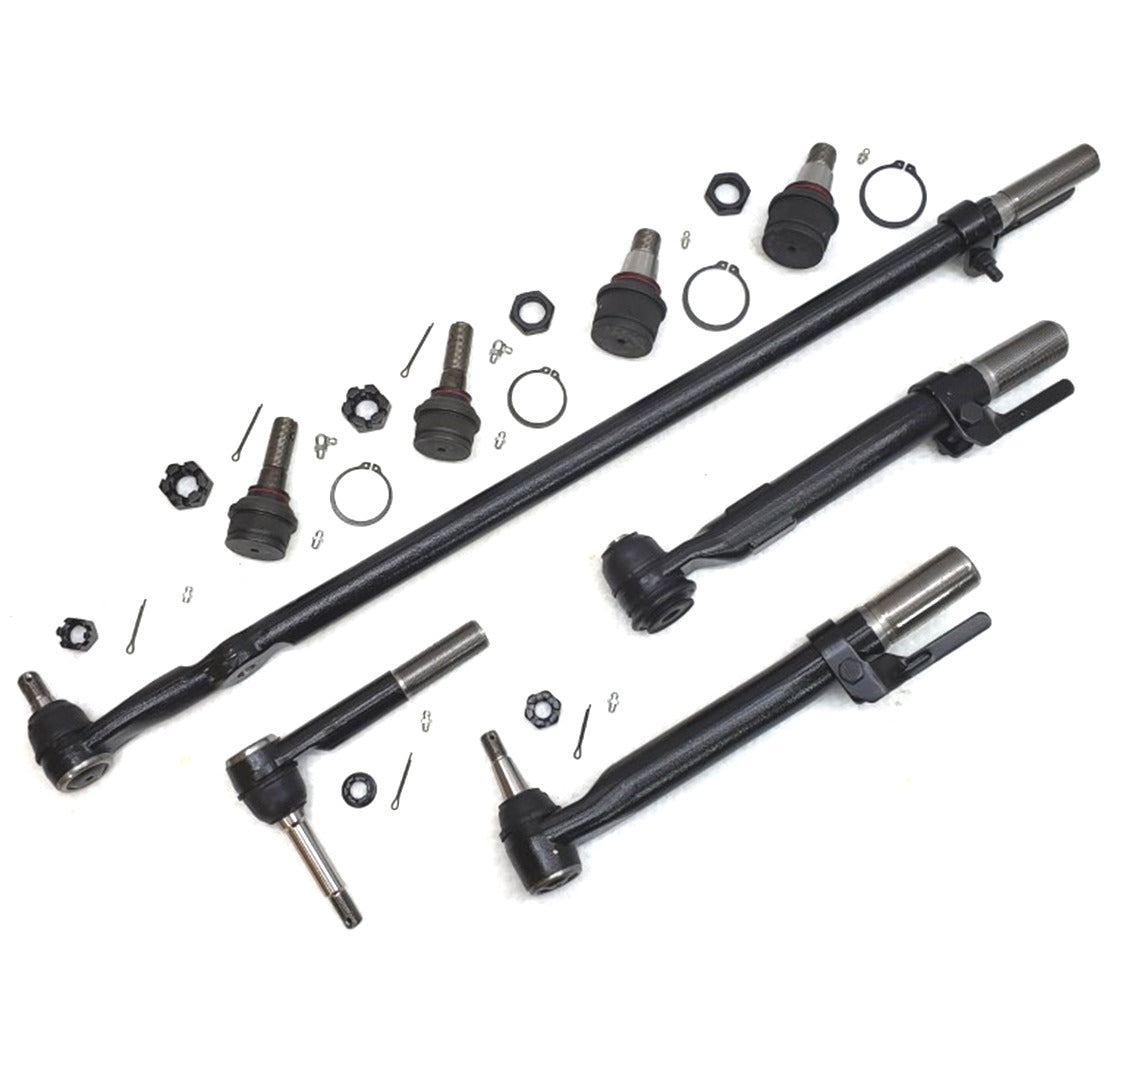 Lifetime Drag Link Ball Joint Tie Rod Steering Kit for 2011-2016 Ford F250, F350 Super Duty 4x4 SRW